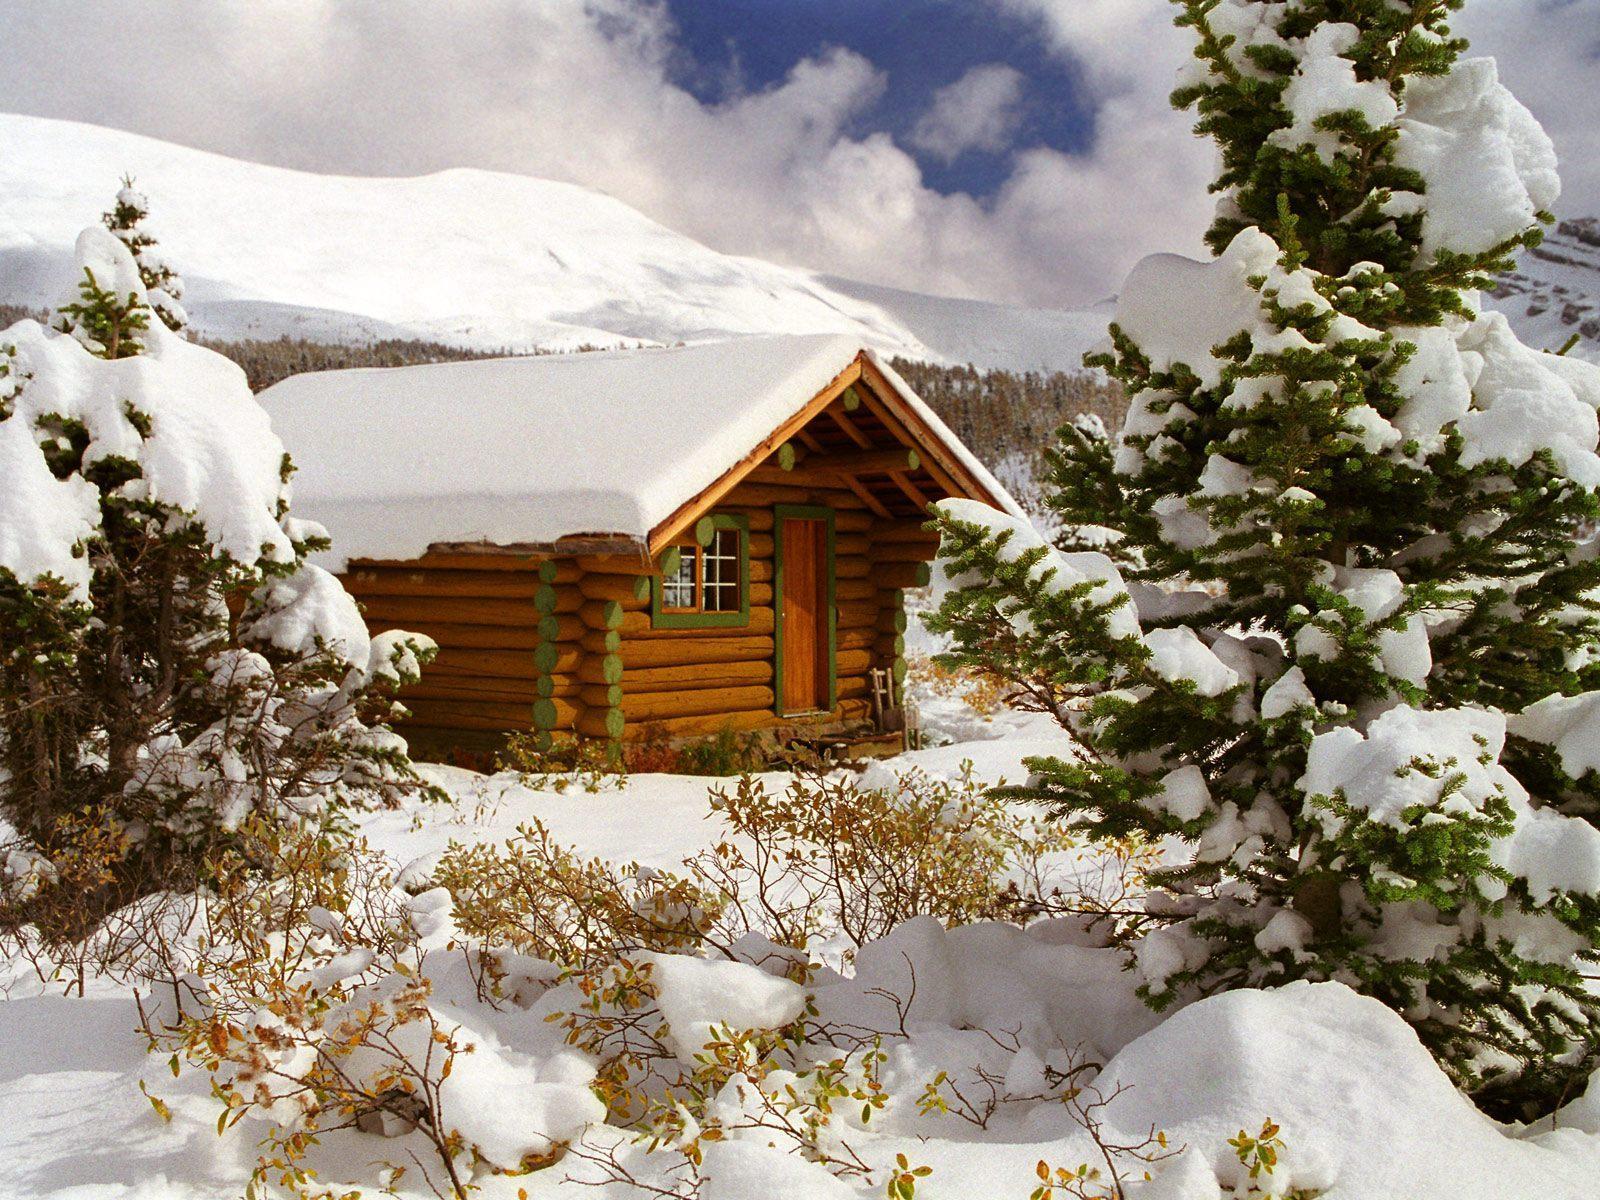 Mountain Cabin Wallpaper. Daily inspiration art photo, picture